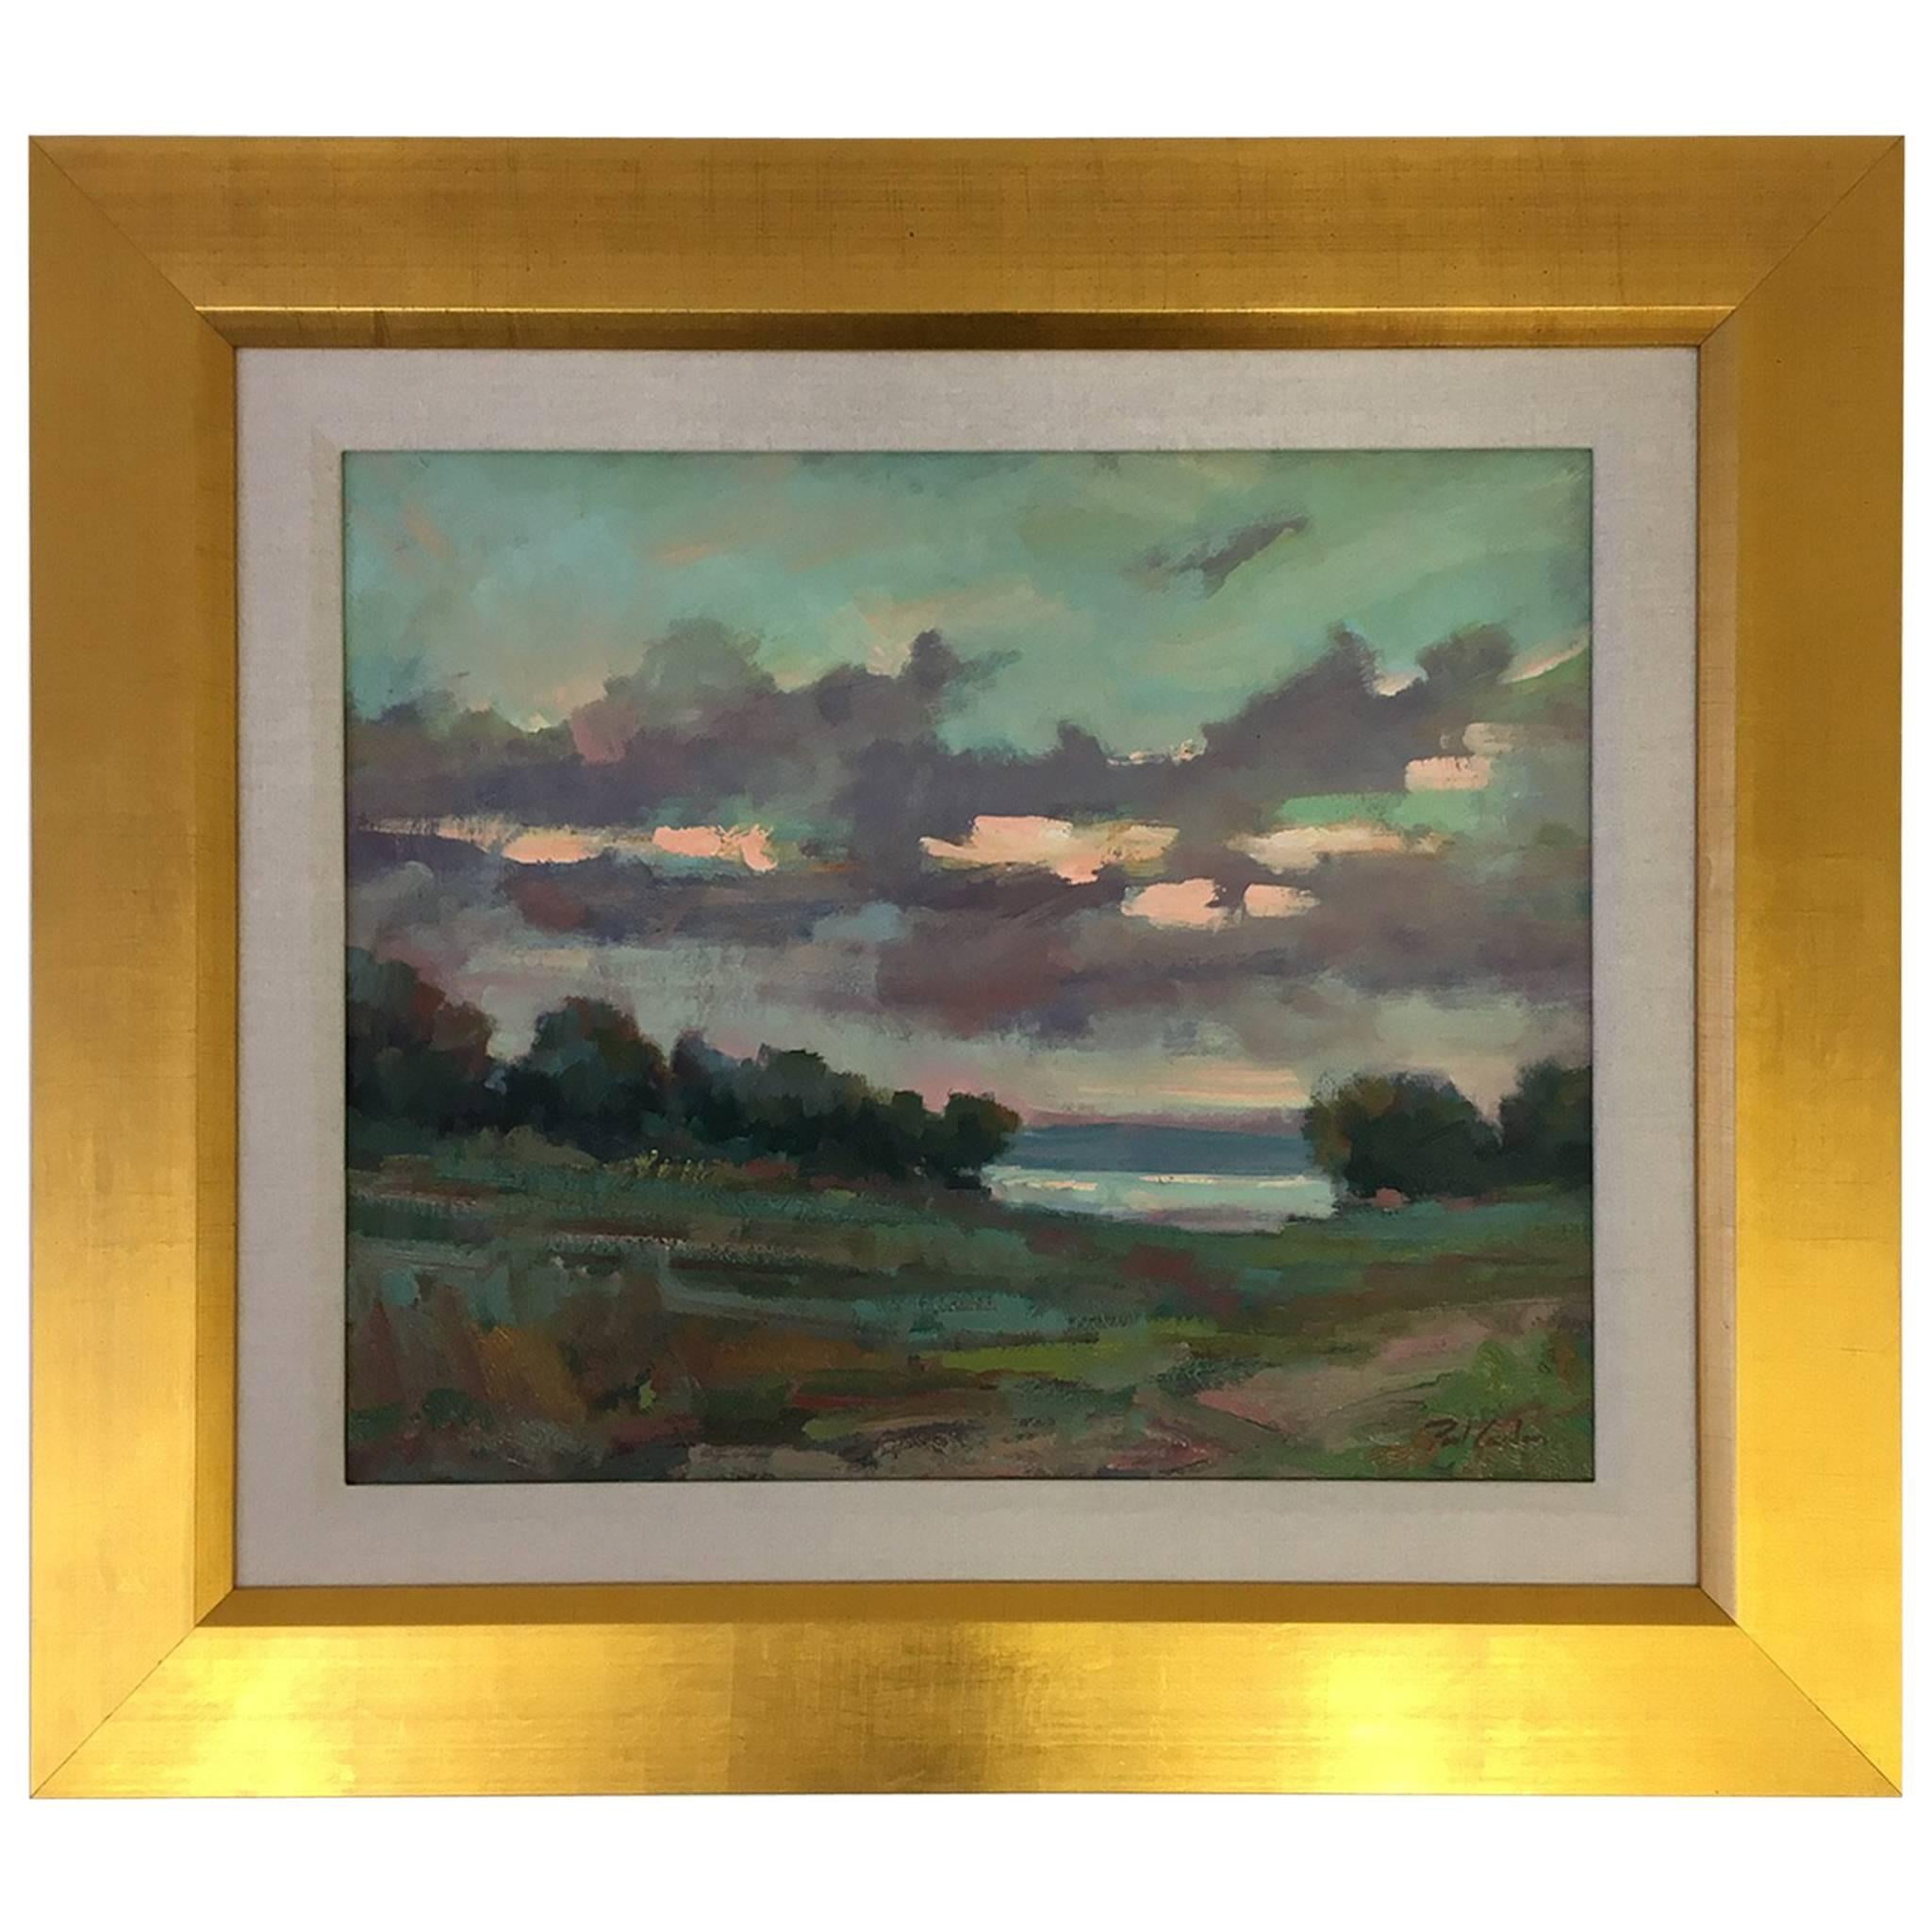 Original Oil on Board Landscape Painting by Listed Artis Paul Casebeer